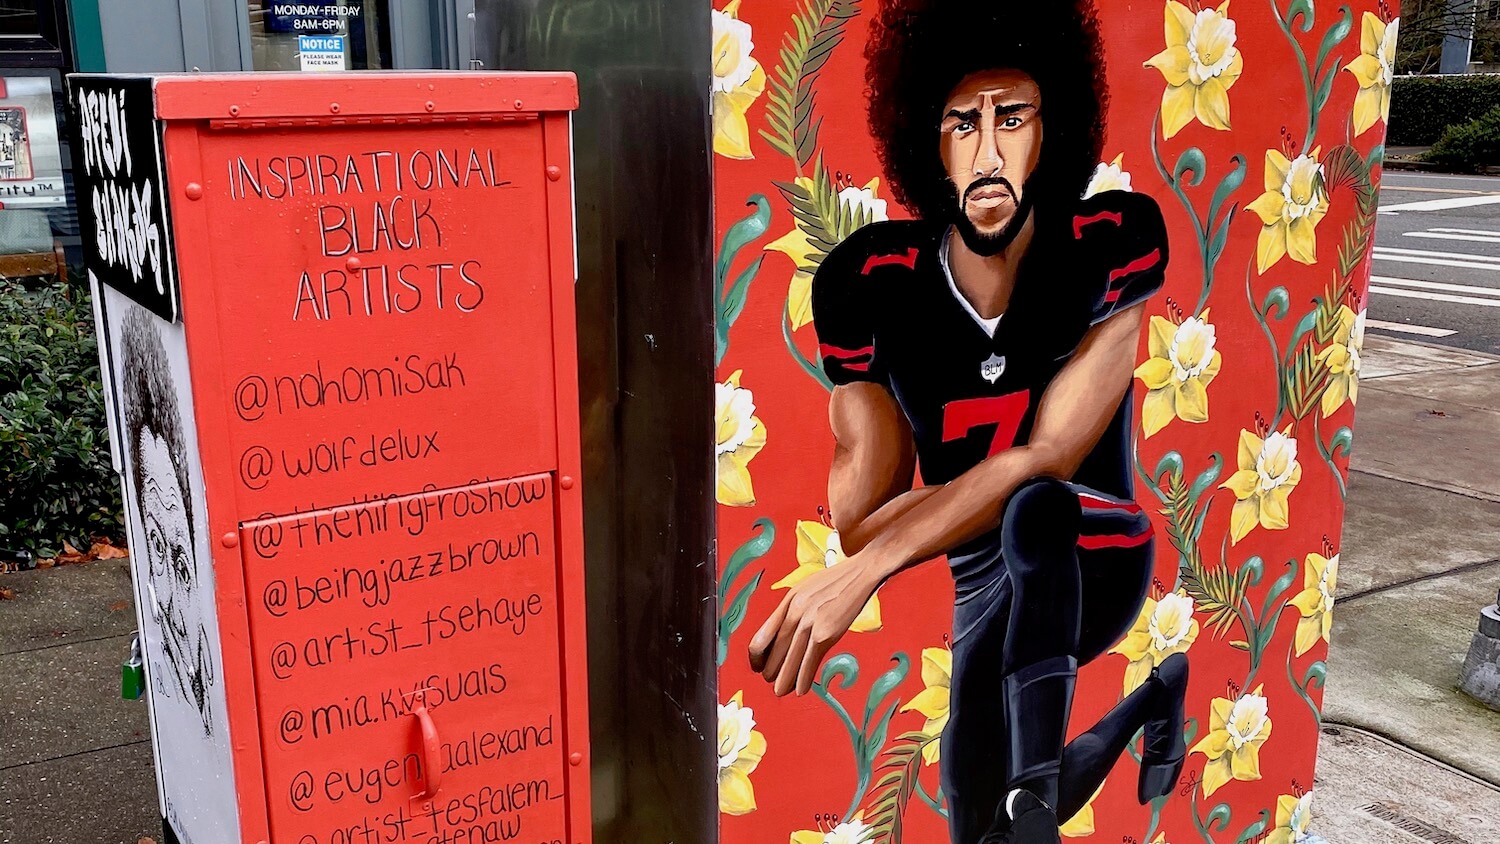 A mural of Colin Kaepernick kneeling on is pained on the side of an electrical box in Seattle.  His football uniform is black with red lettering and he is surrounded by yellow daffodils  and a red background, that continues to a different electrical box with a list of inspirational black artists.  